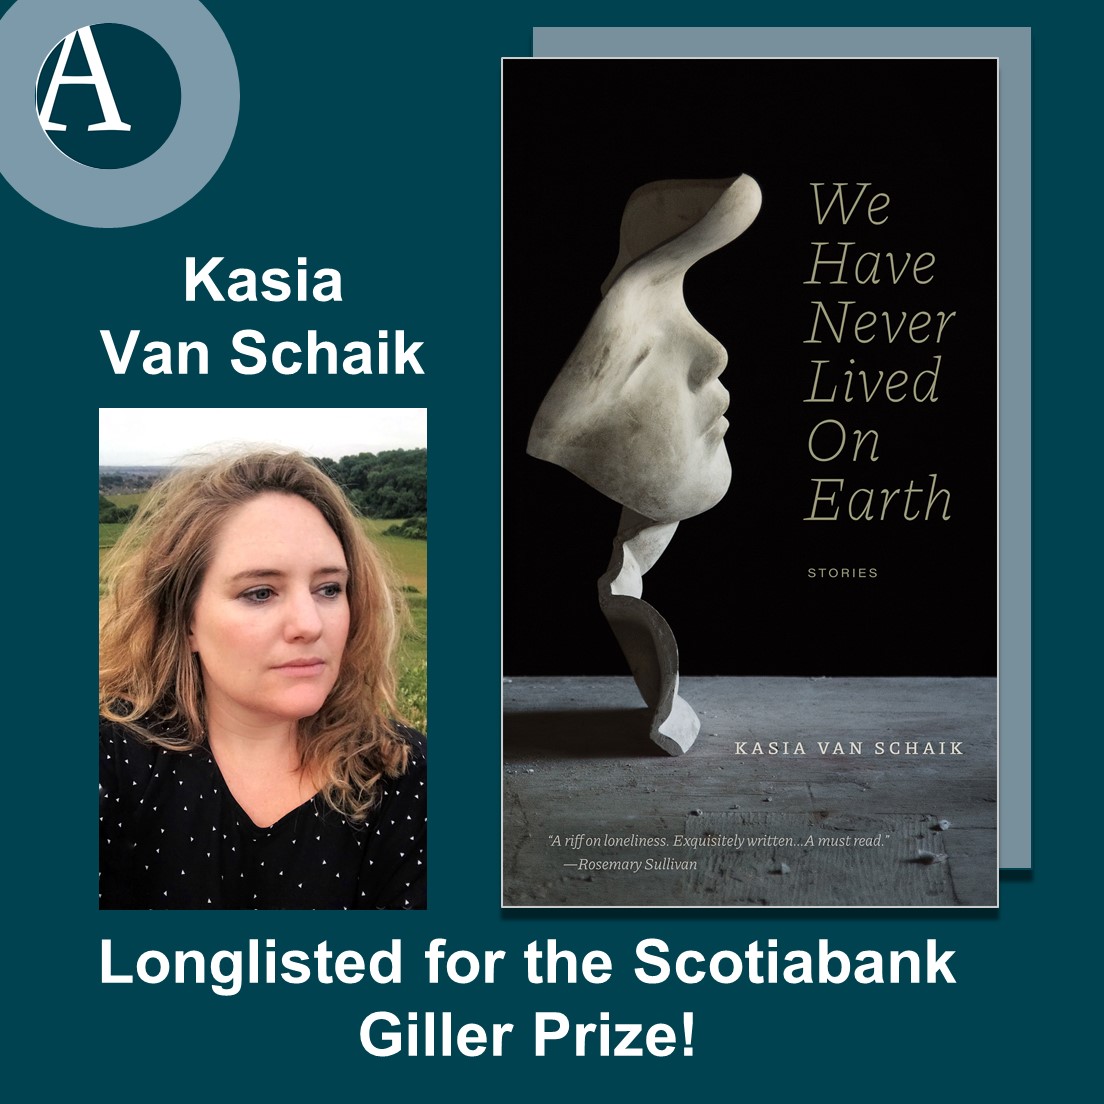 Kasia Van Schaik’s book of short stories, WE HAVE NEVER LIVED ON EARTH, is longlisted for the #ScotiabankGillerPrize!

@KasiaJuno, your team is SO excited:
@Doug_Hild, @MLobkowicz, @CathieCrooks, Duncan Turner, Alan Brownoff, Elisia Snyder, @MatBuntin,
@kimmy_beach, Mary Lou Roy